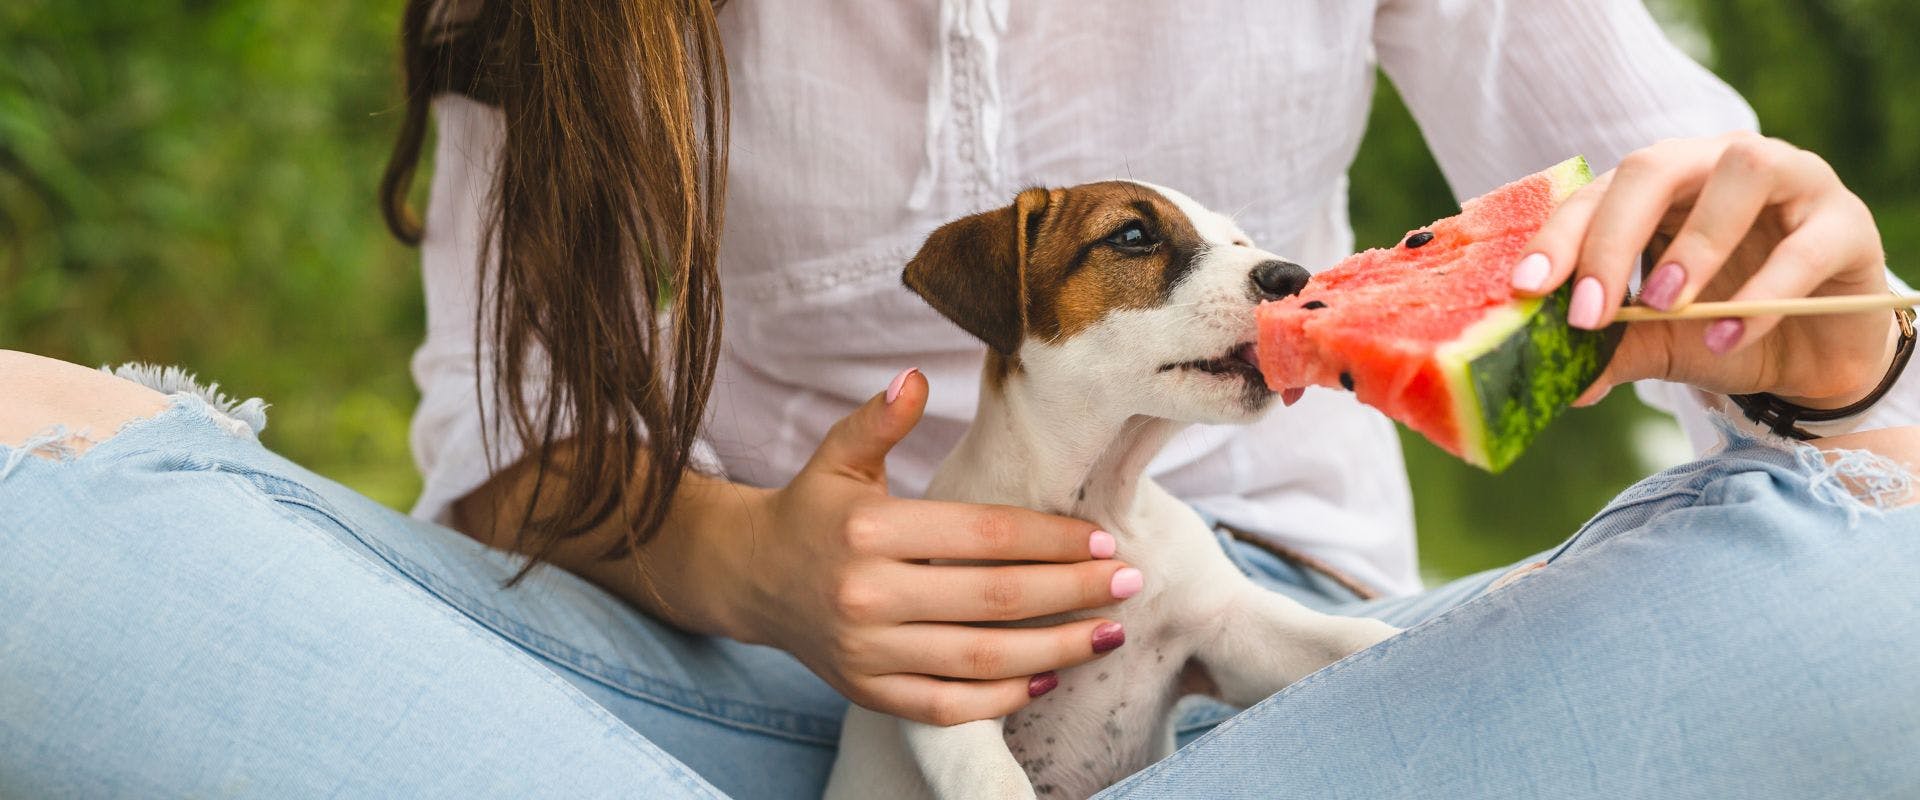 Jack Russell dog eating watermelon